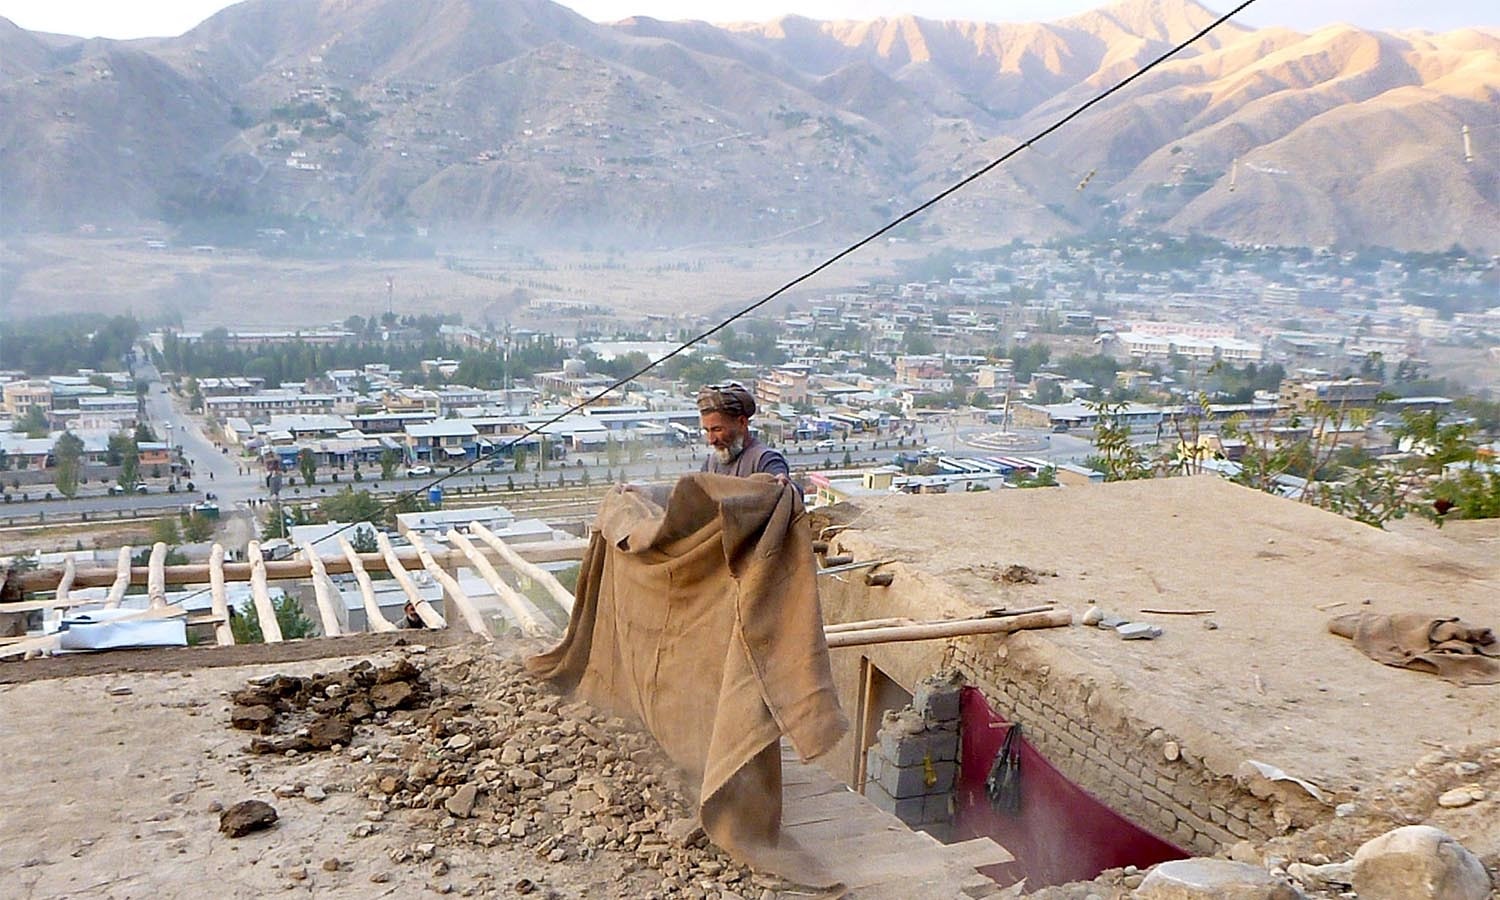 A man clears rubbles from the roof of his house after an earthquake, in Fayzabad capital of Badakhshan province, Afghanistan October 26, 2015. A powerful earthquake struck a remote area of northeastern Afghanistan on Monday, shaking the capital Kabul, as shockwaves were felt in northern India and in Pakistan's capital, where hundreds of people ran out of buildings as the ground rolled beneath them. REUTERS/Stringer          EDITORIAL USE ONLY. NO RESALES. NO ARCHIVE